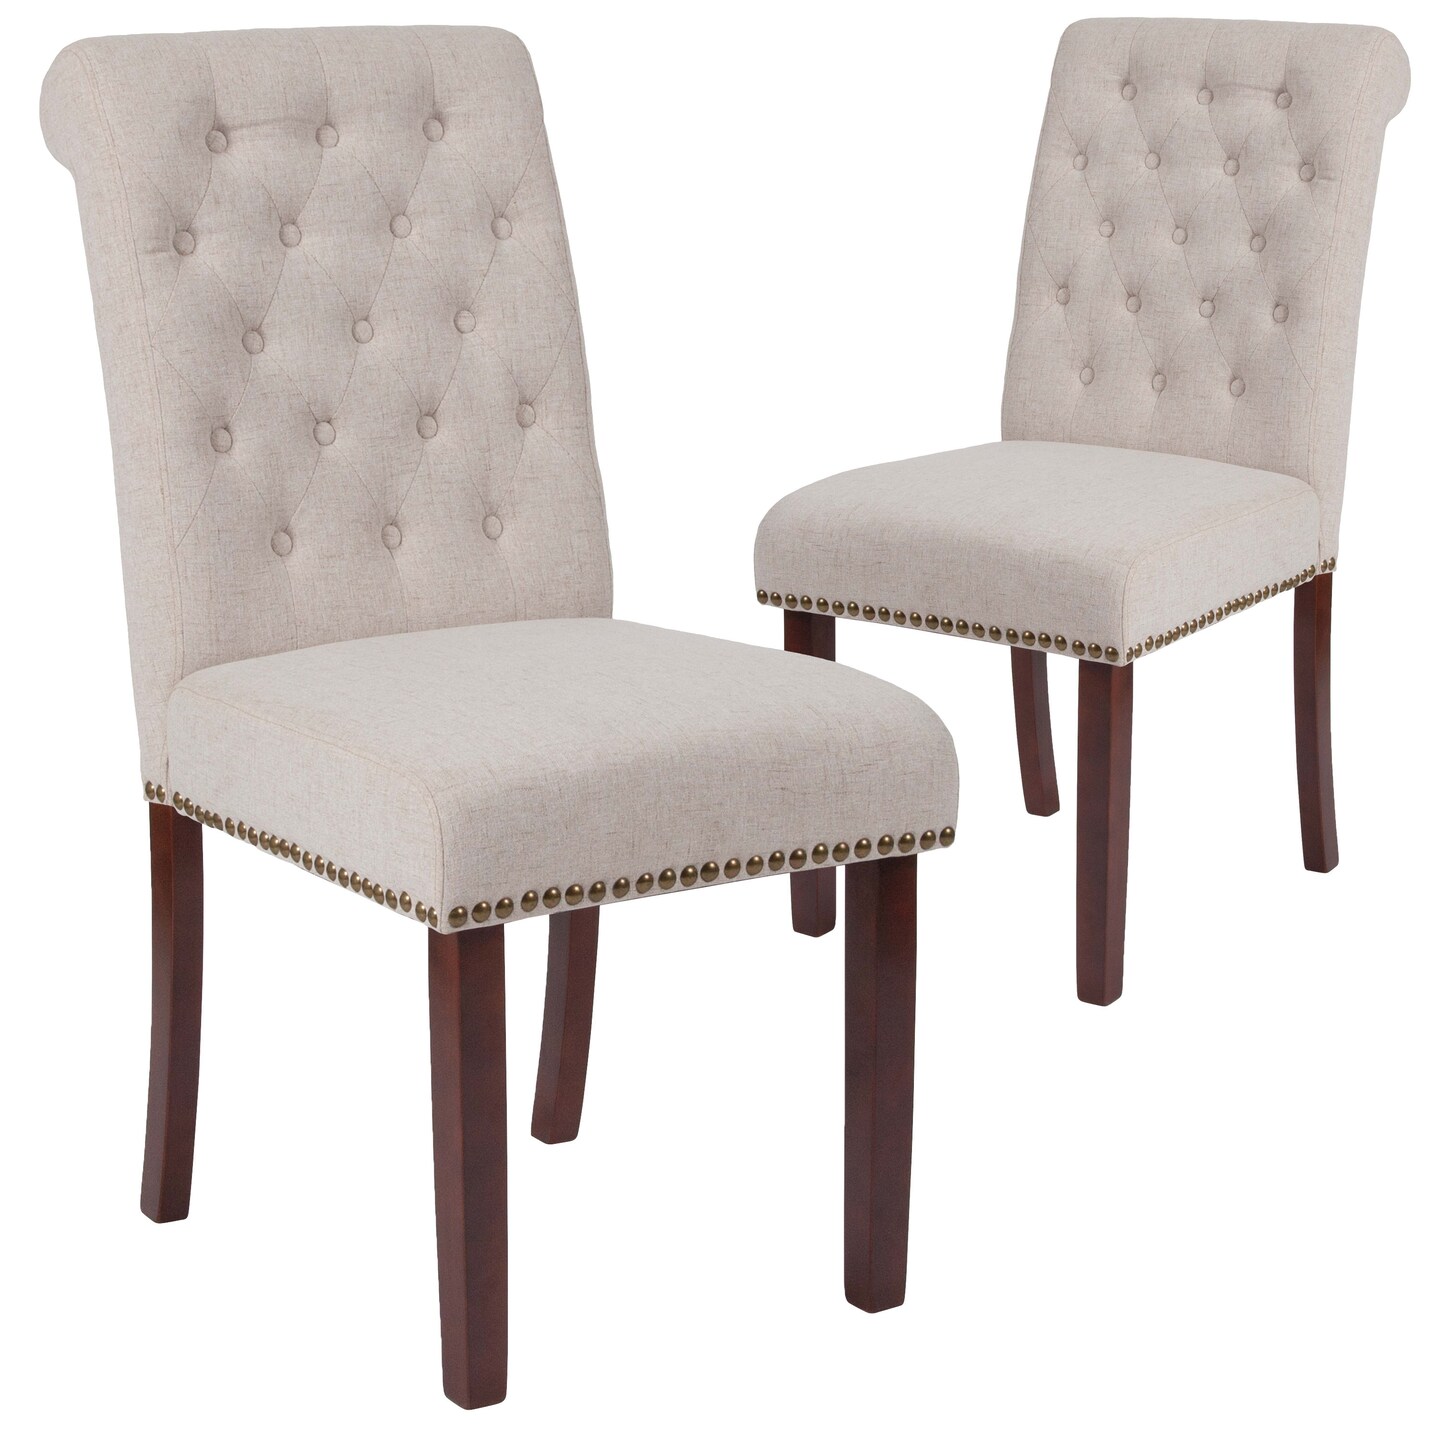 Emma and Oliver 2 PK Upholstered Rolled Back Parson&#x27;s Chair with Nailhead Trim &#x26; Finished Frame with Plastic Floor Glides